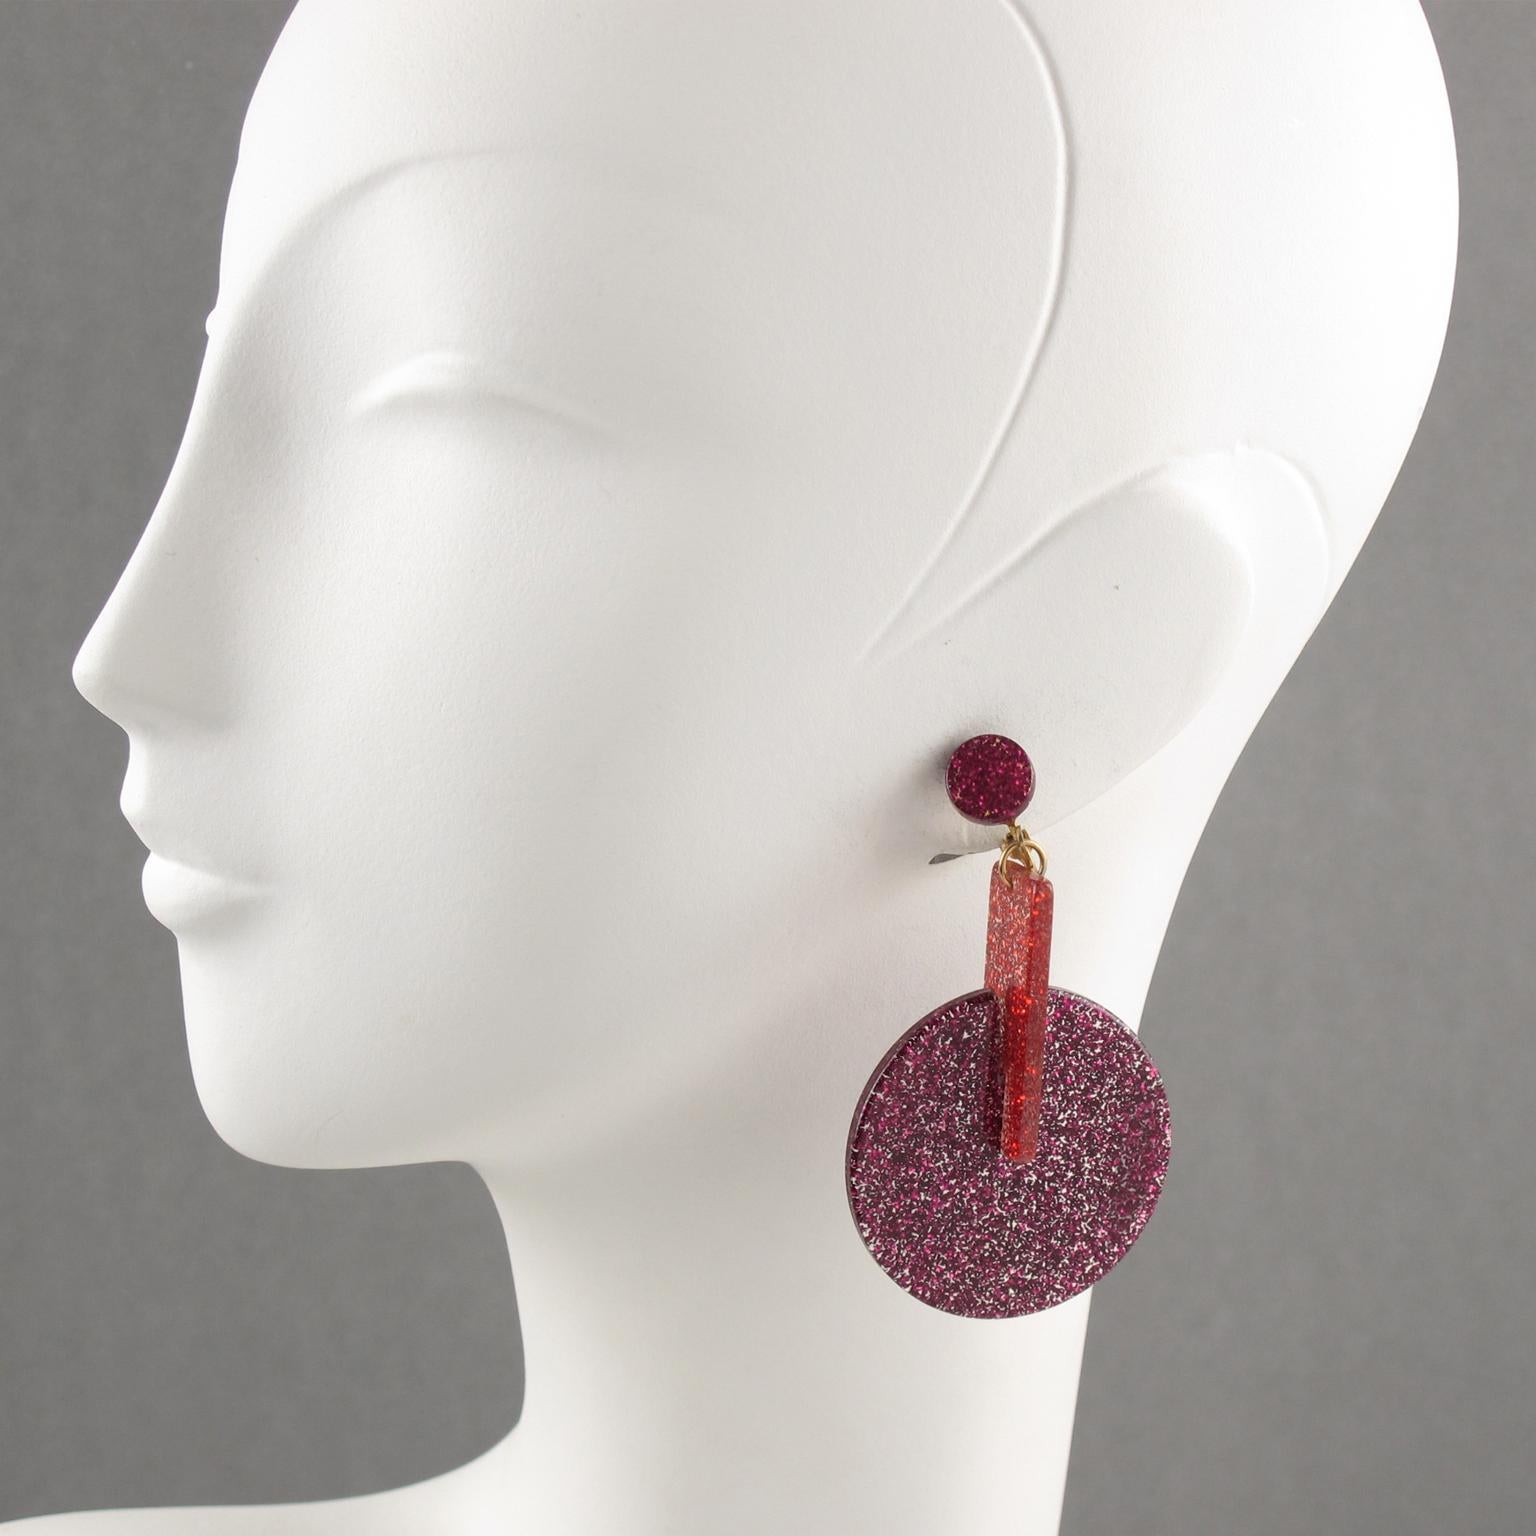 These lovely Lucite clip-on earrings feature a dangling geometric shape with glitter flakes inclusions. The pieces boast bright red and purple-pink fuchsia colors with a mesmerizing glitter effect. There is no visible maker's mark.
Measurements: